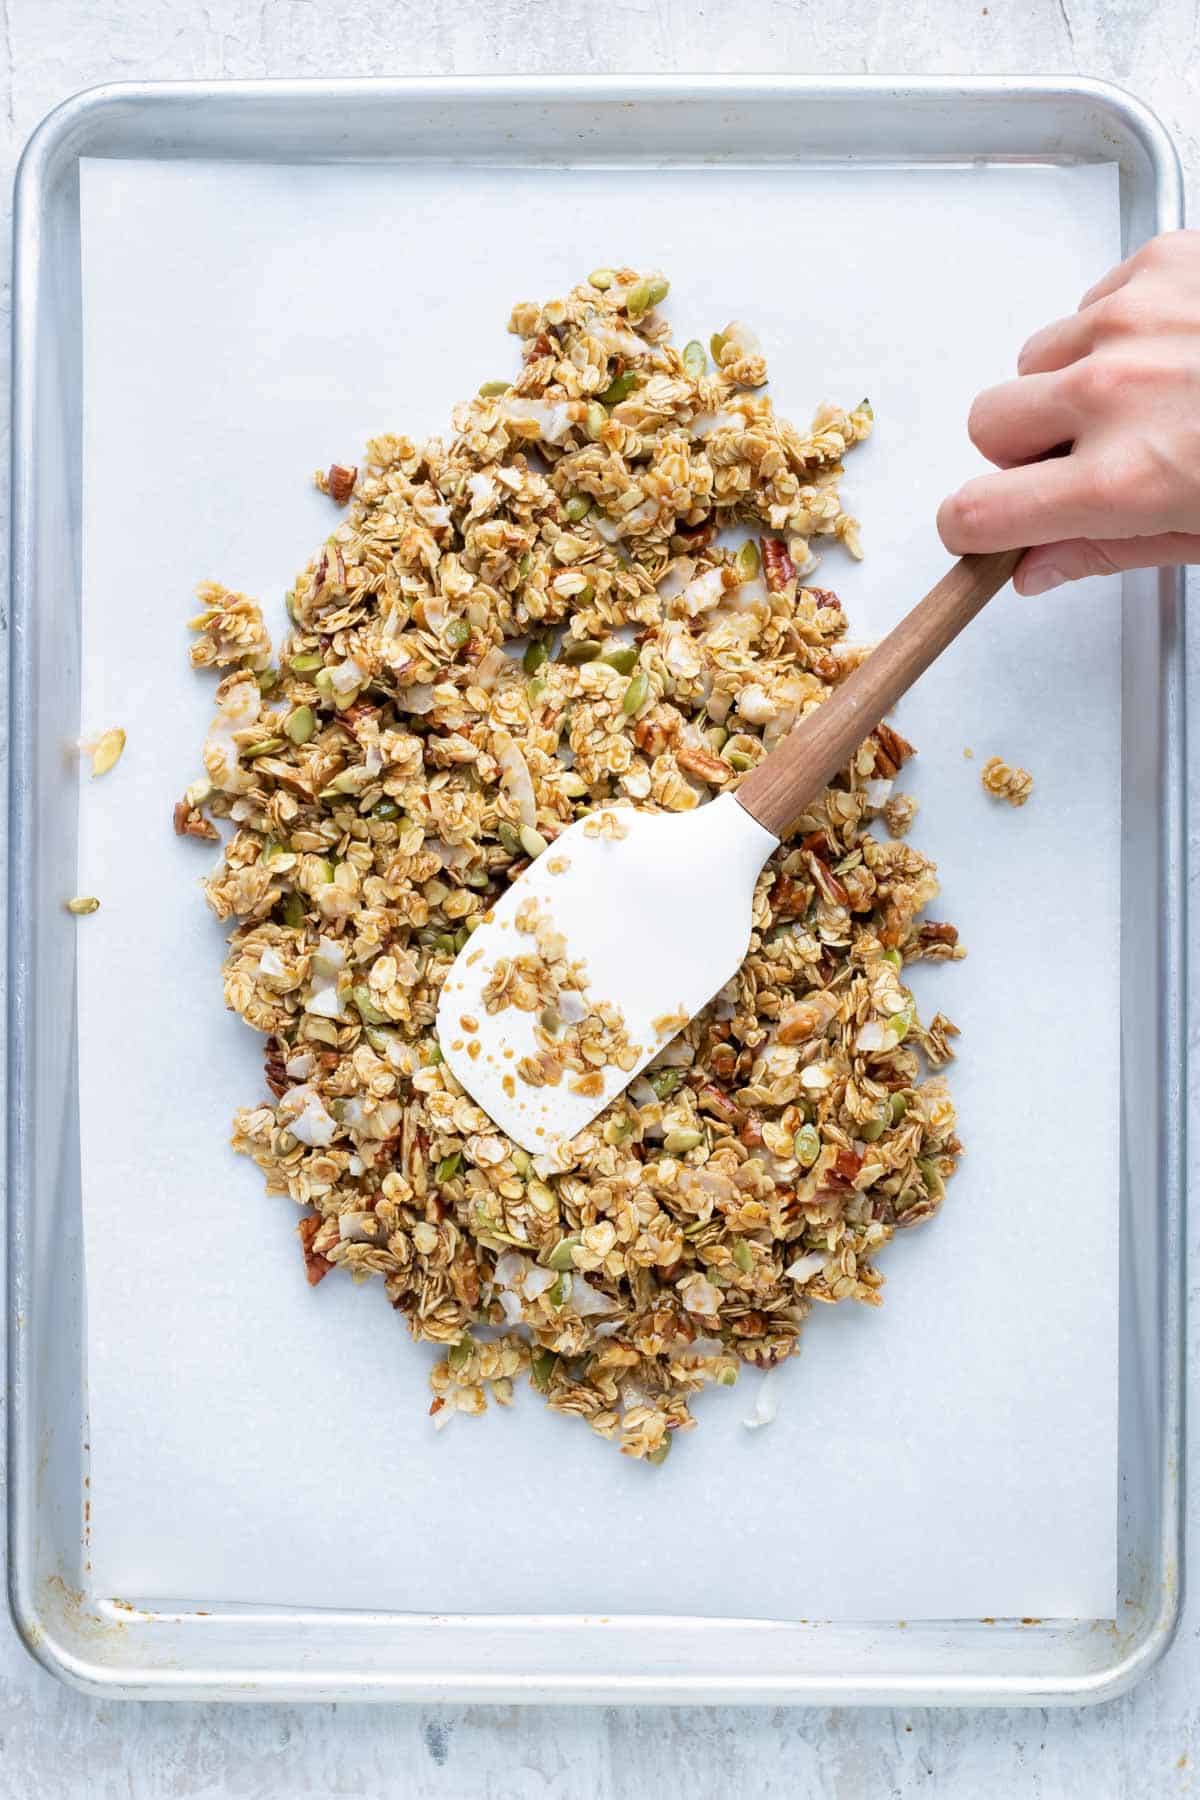 A spatula spreads the granola mixture on a baking sheet.